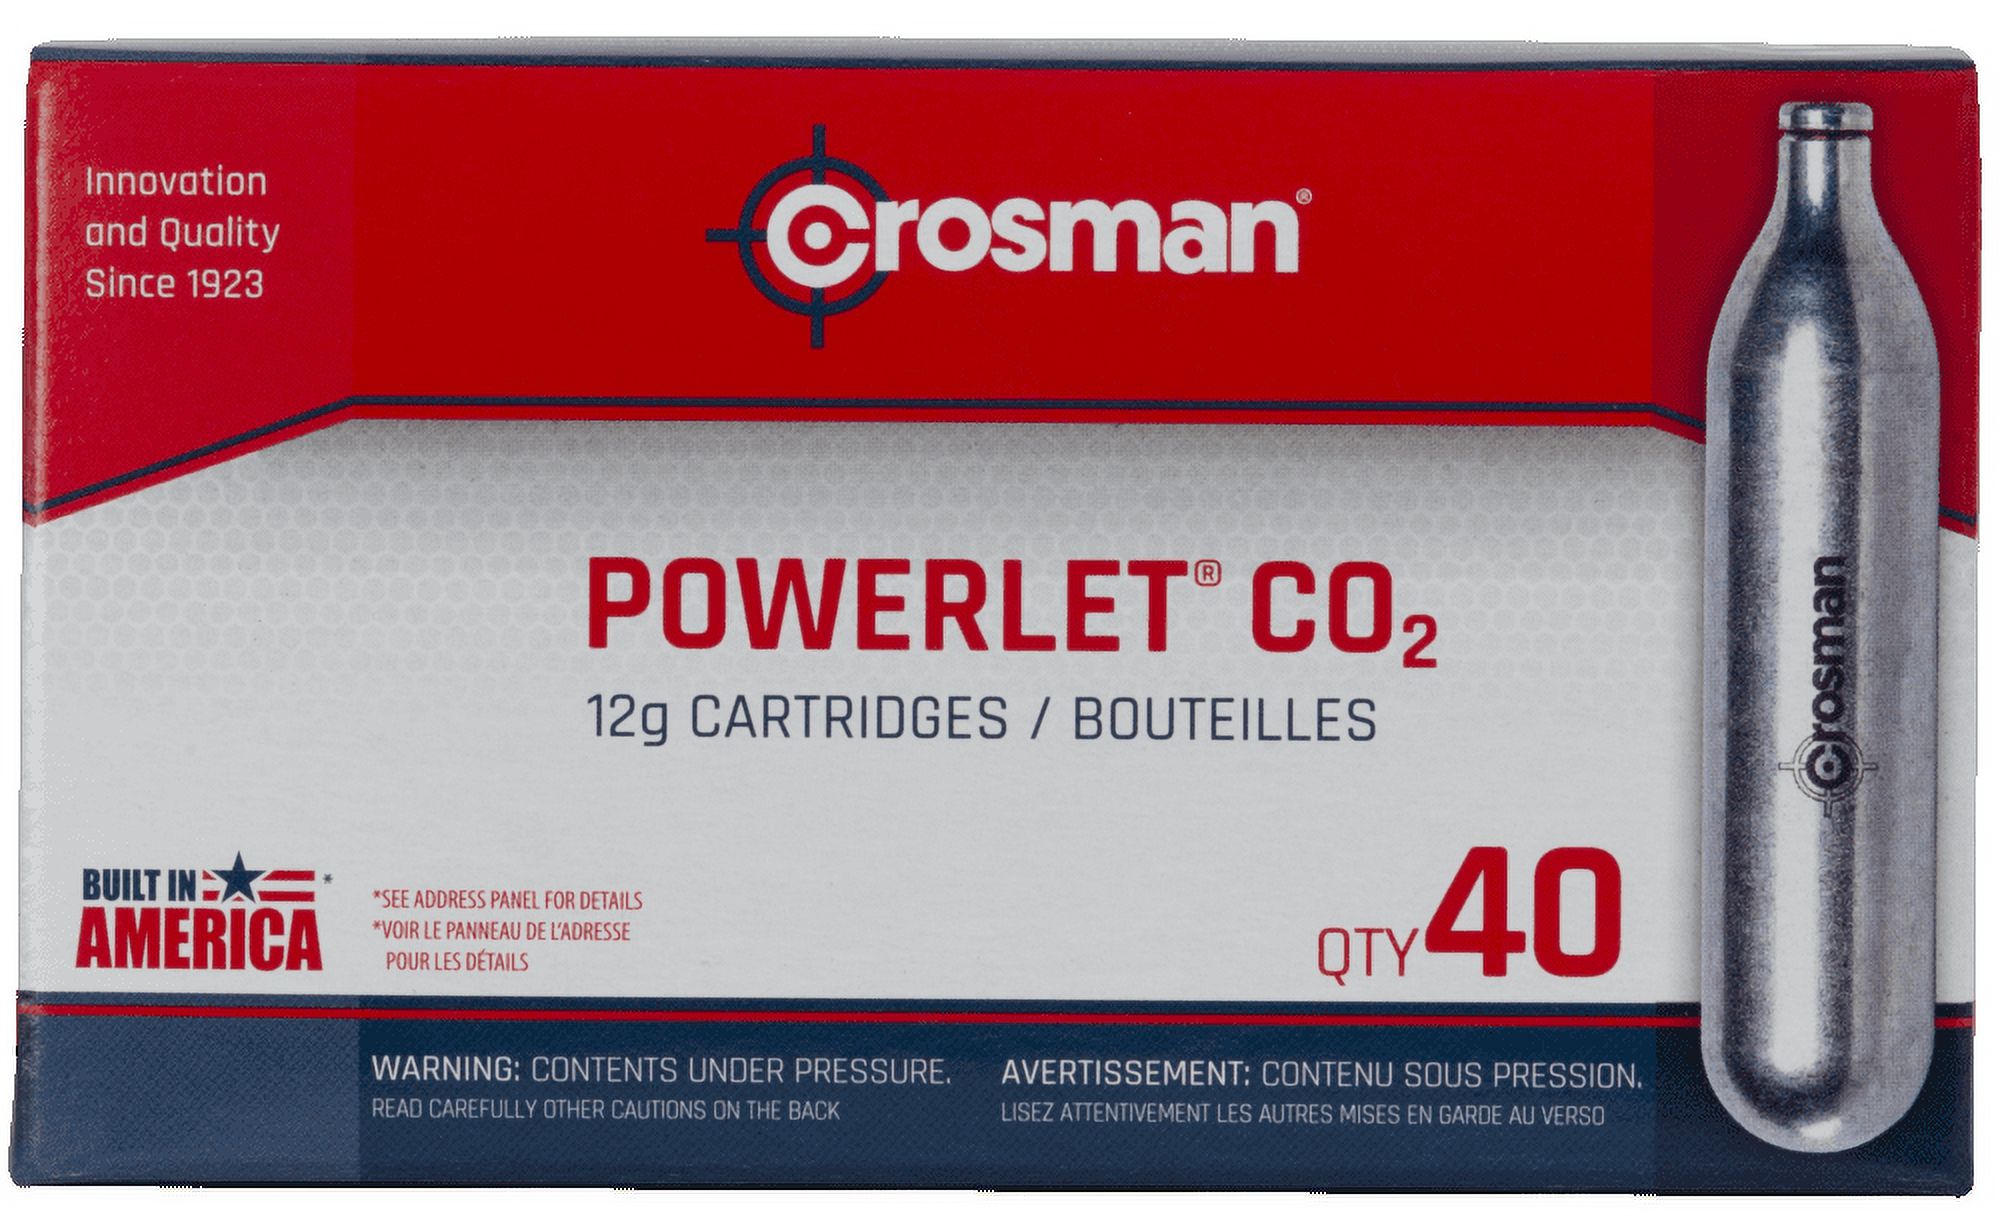 Crosman 12 Gram Co2 Powerlets, 40ct, for Use with Paintball, Air Soft or Air Rifles - image 4 of 4